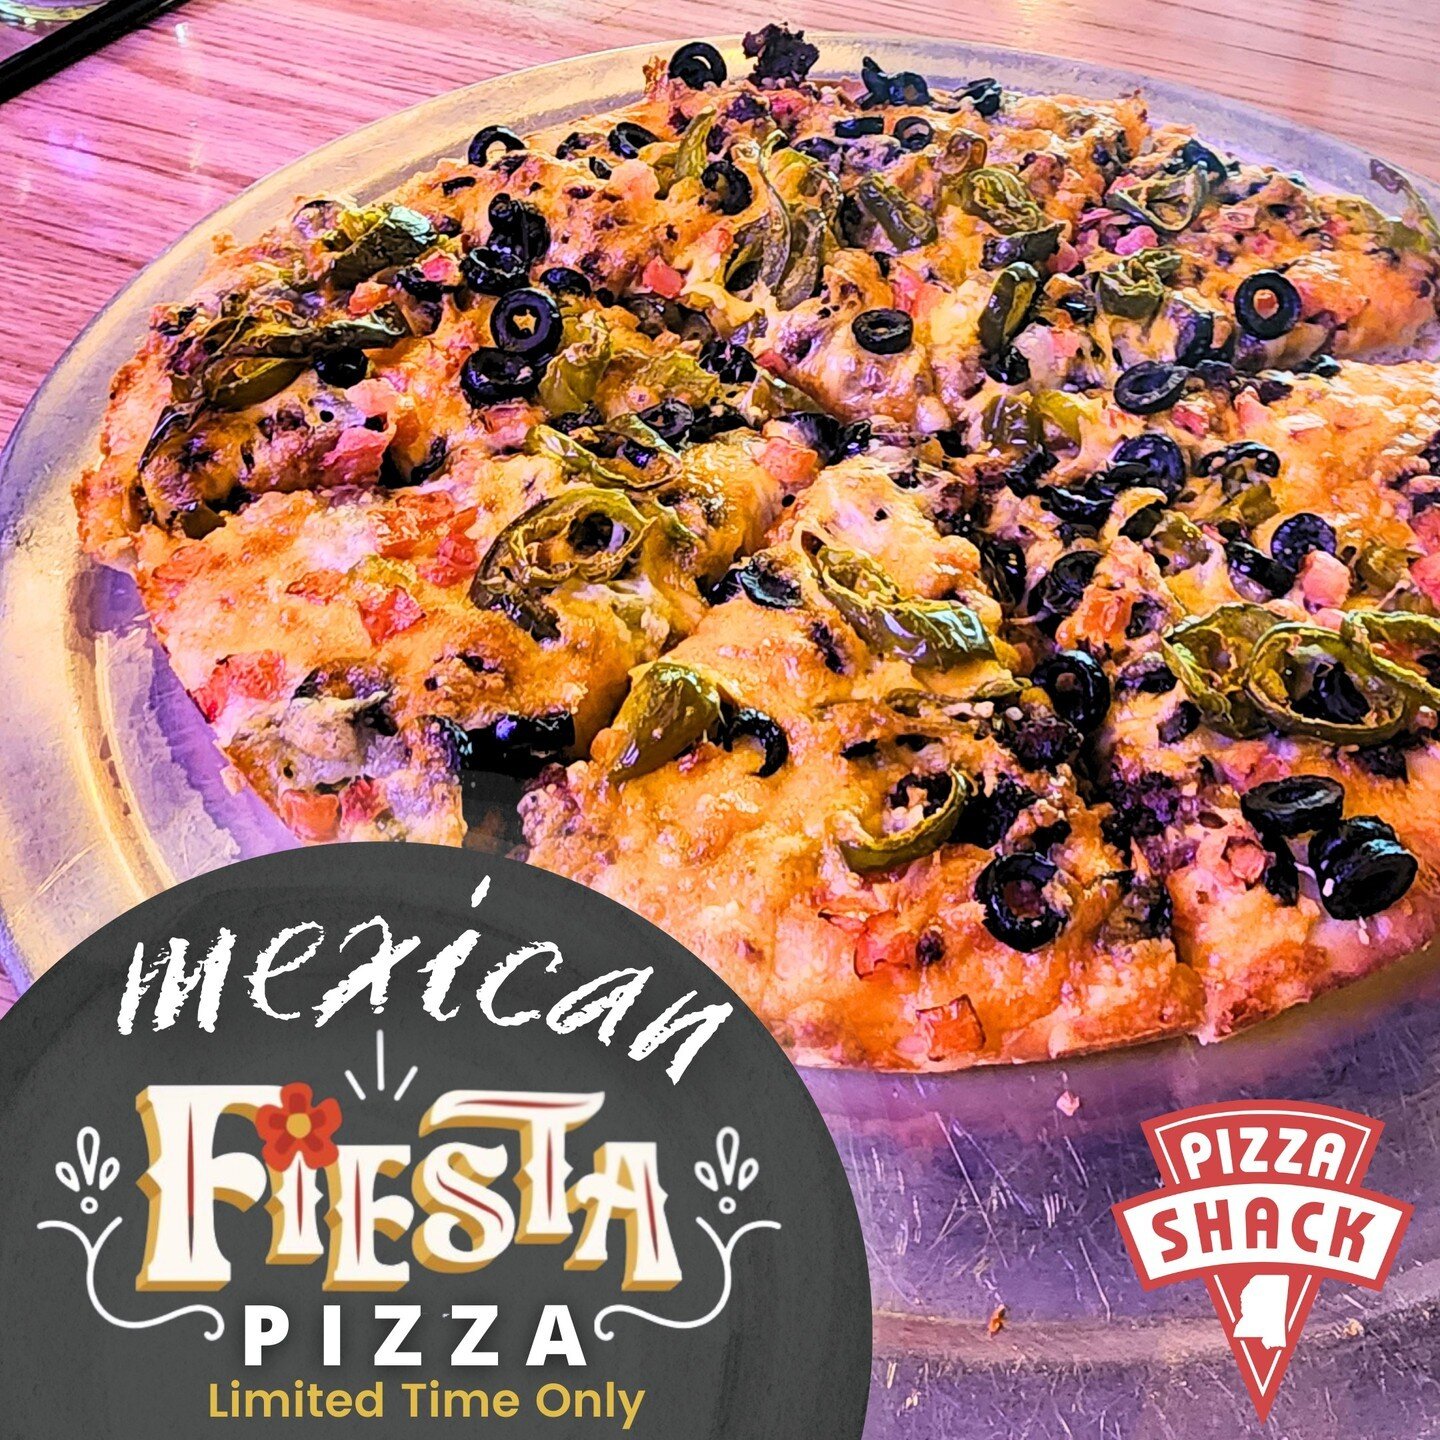 Our Mexican Fiesta Pizza is a game changer for pizza lovers! 🔥🍕 With picante sauce, seasoned beef, jalapeños, and even Doritos, this pizza is not to be missed! Share it with your loved ones and spice up your pizza game.

Order now and share this d